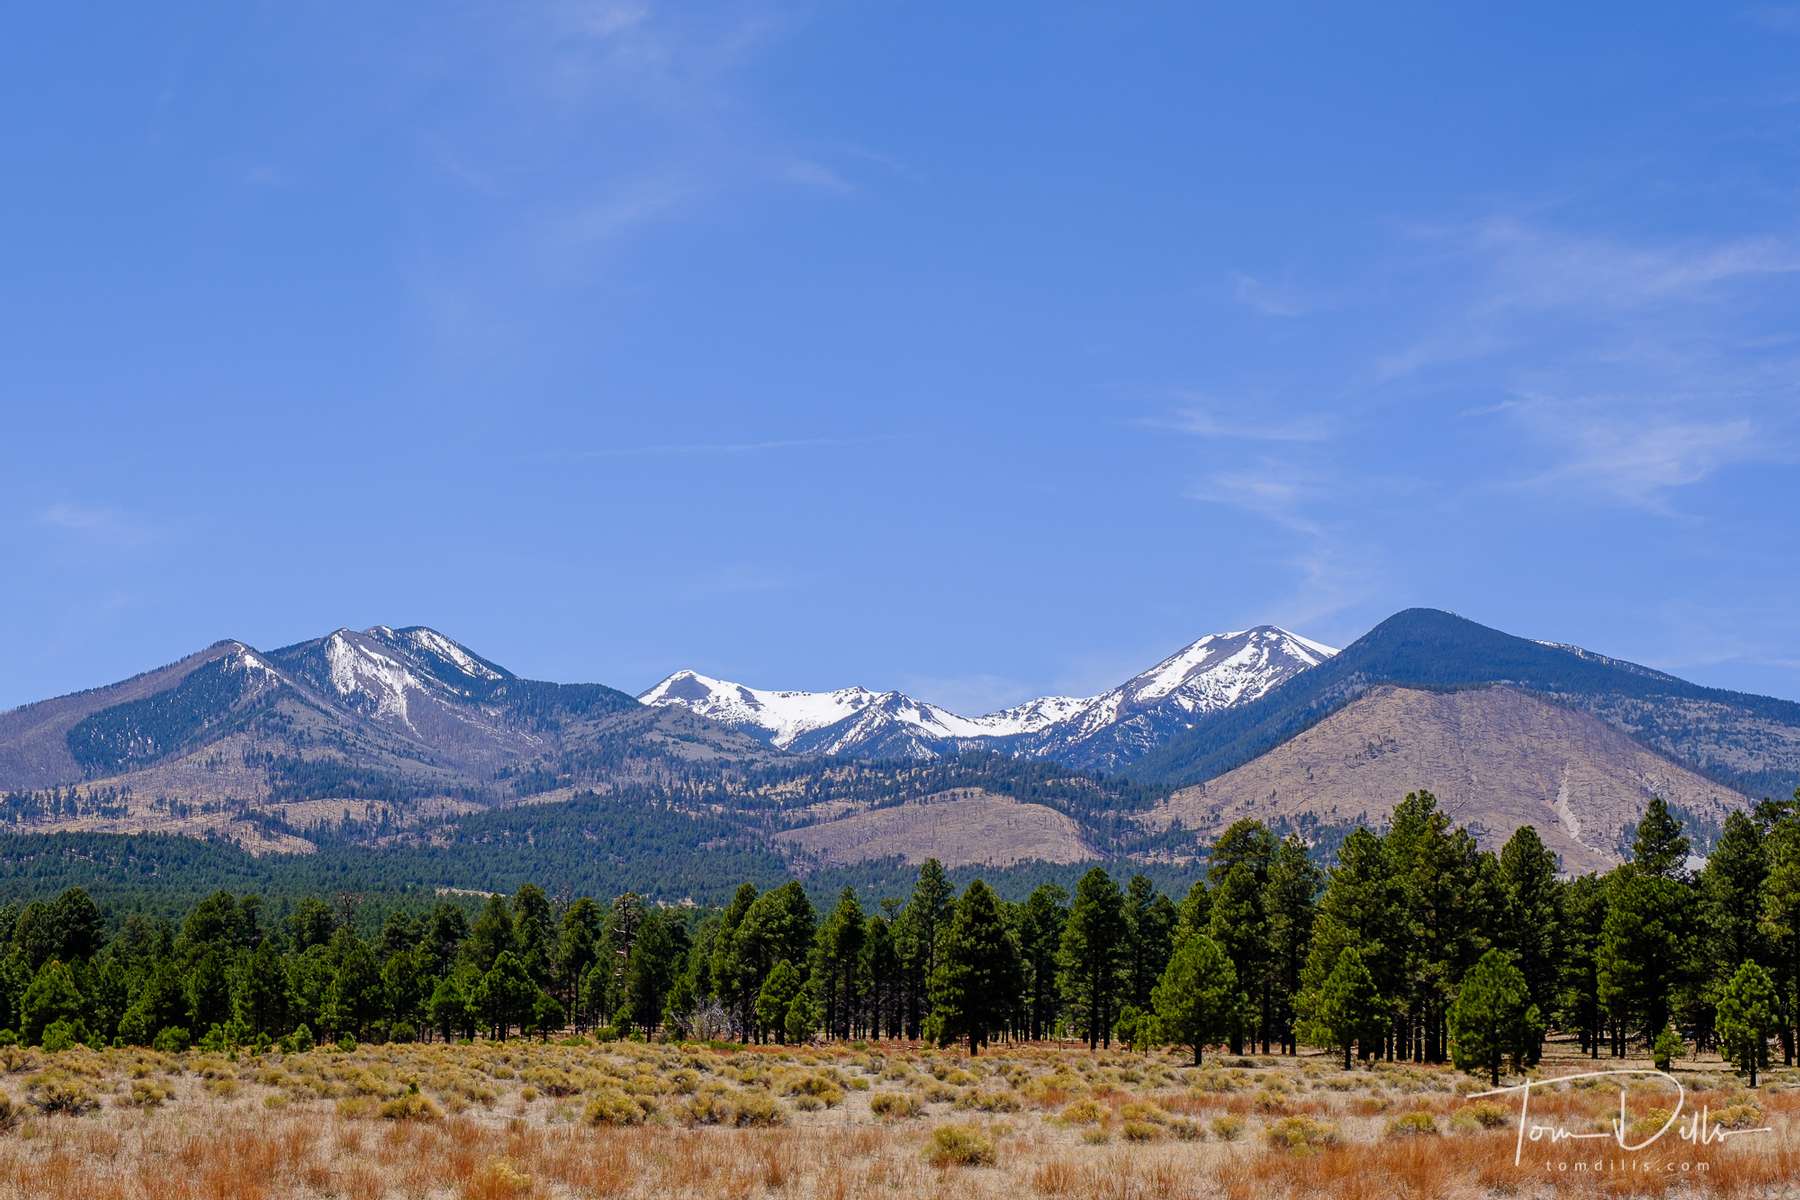 View of the San Francisco Peaks range near Flagstaff, from Sunset Crater Volcano National Monument in Arizona